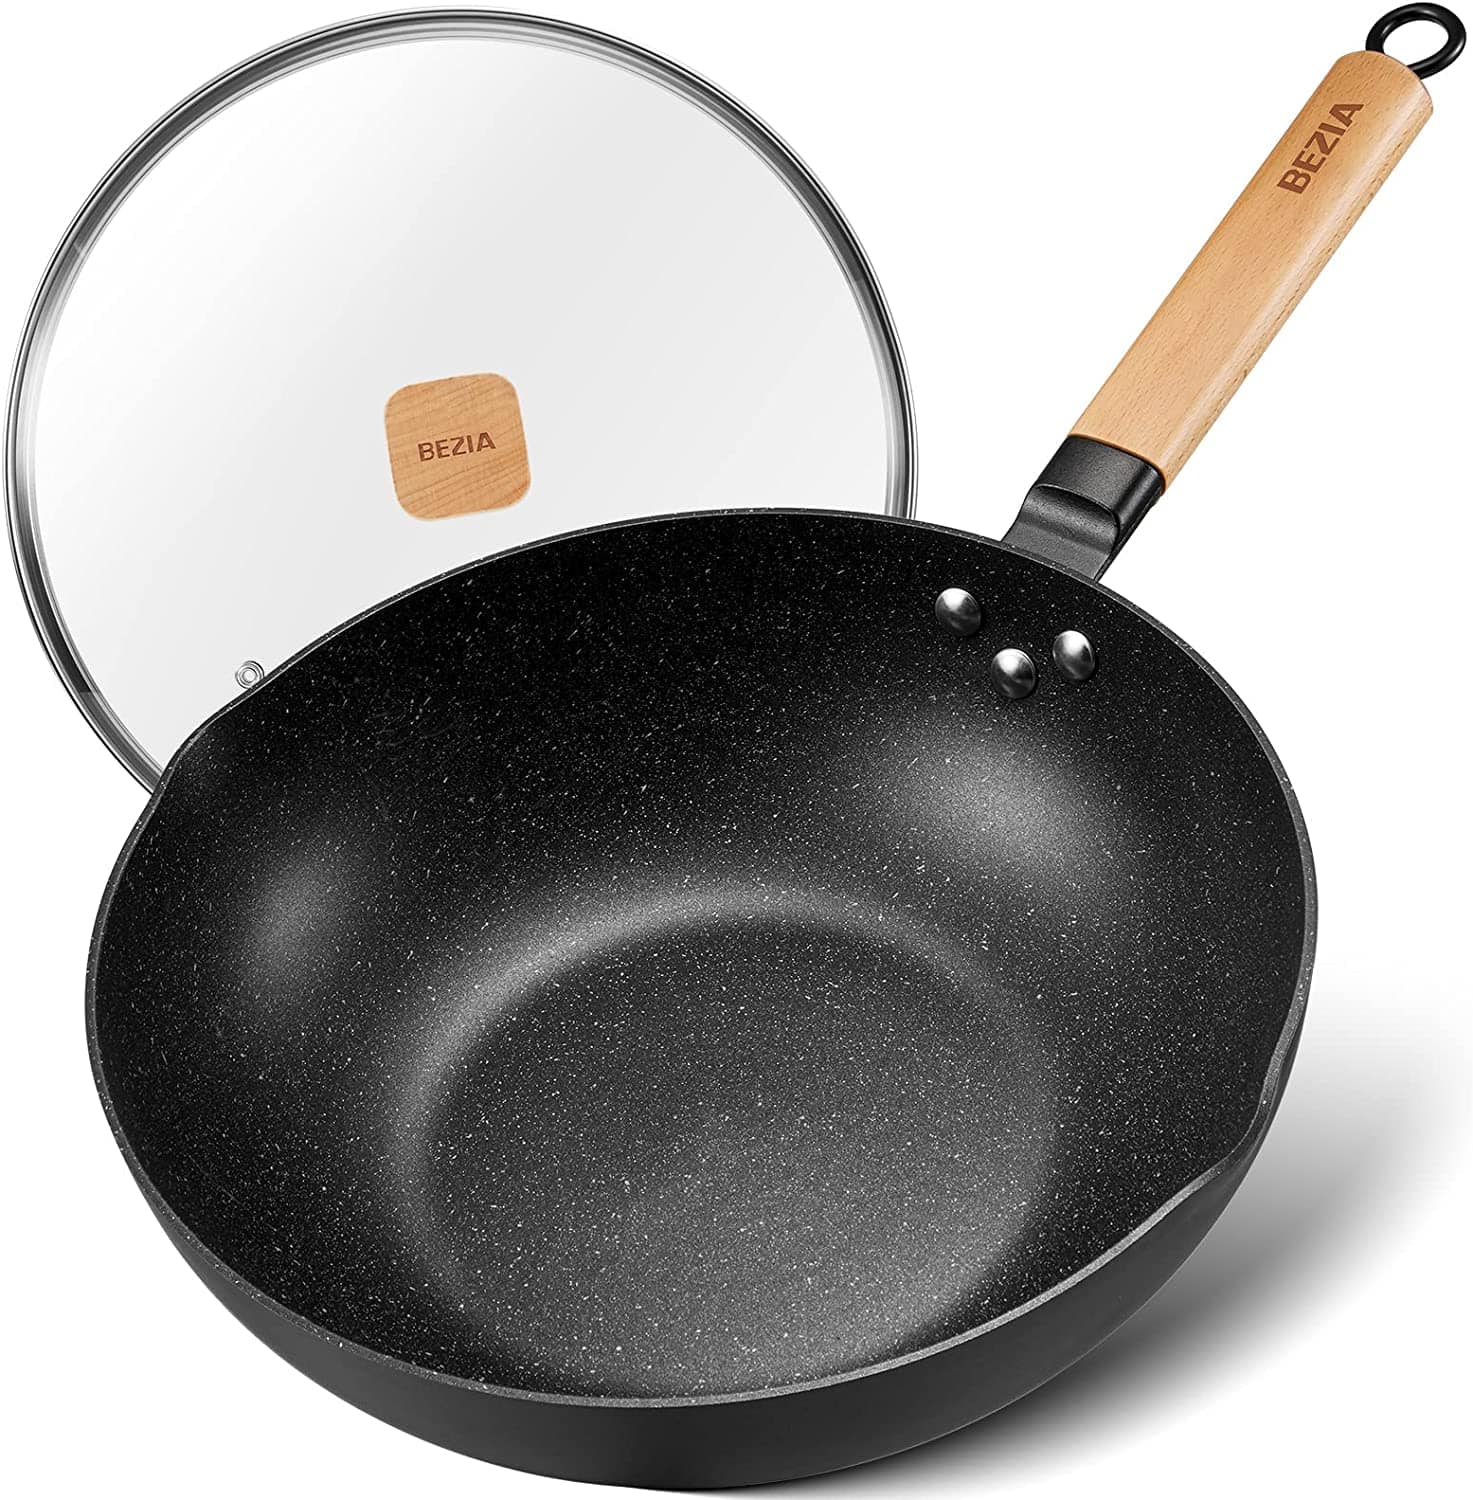 A non-stick wok with a lid on a white background.